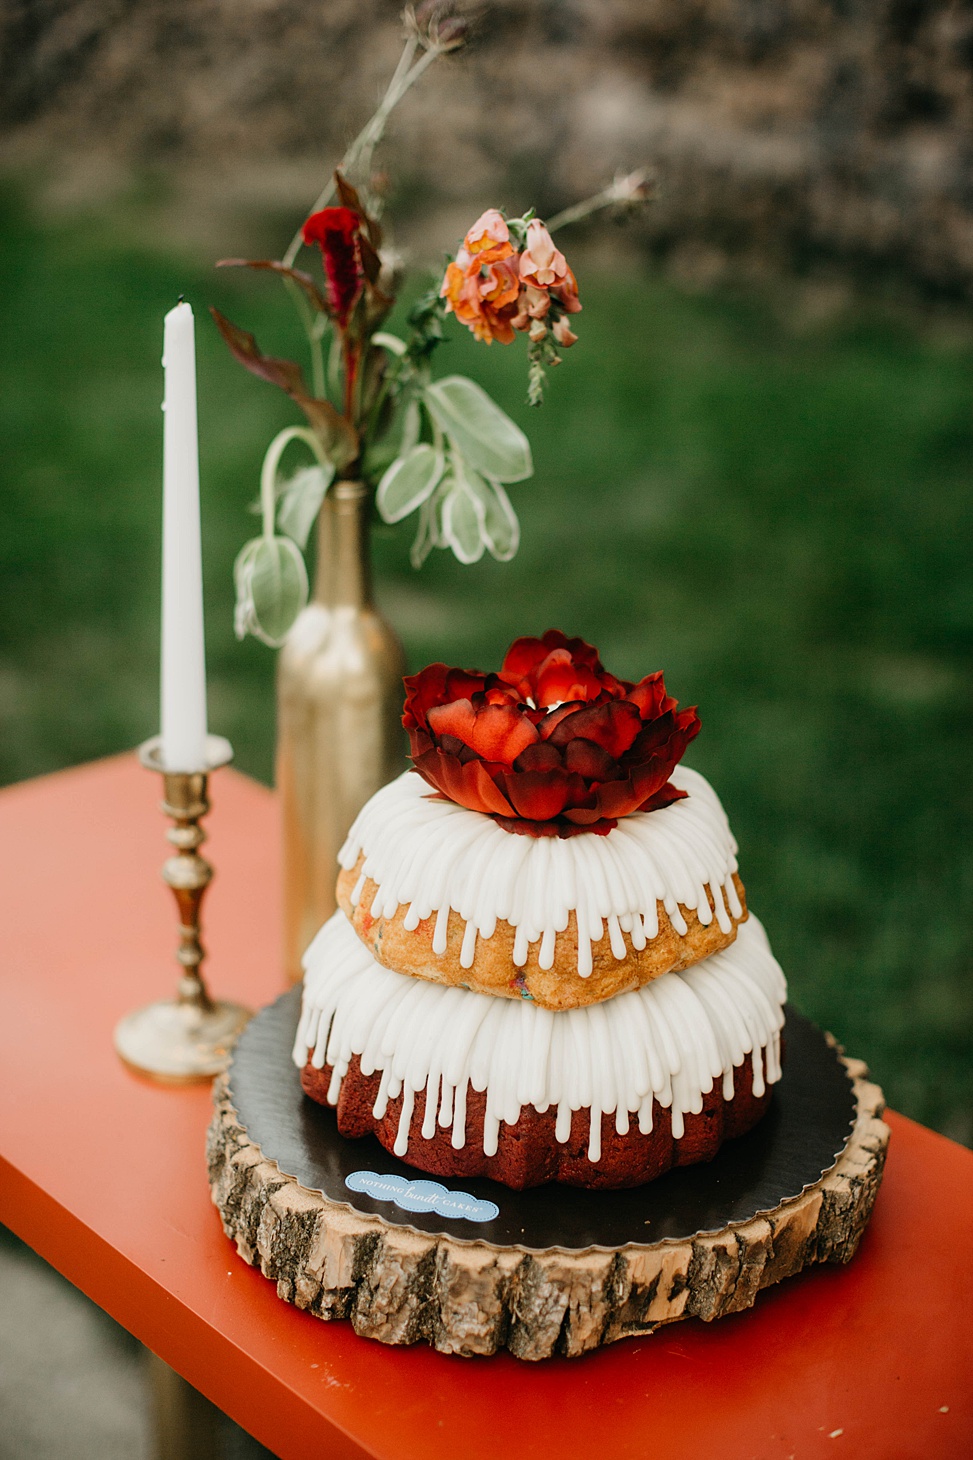 There was a large bundt wedding cake with glazing and a bloom on top